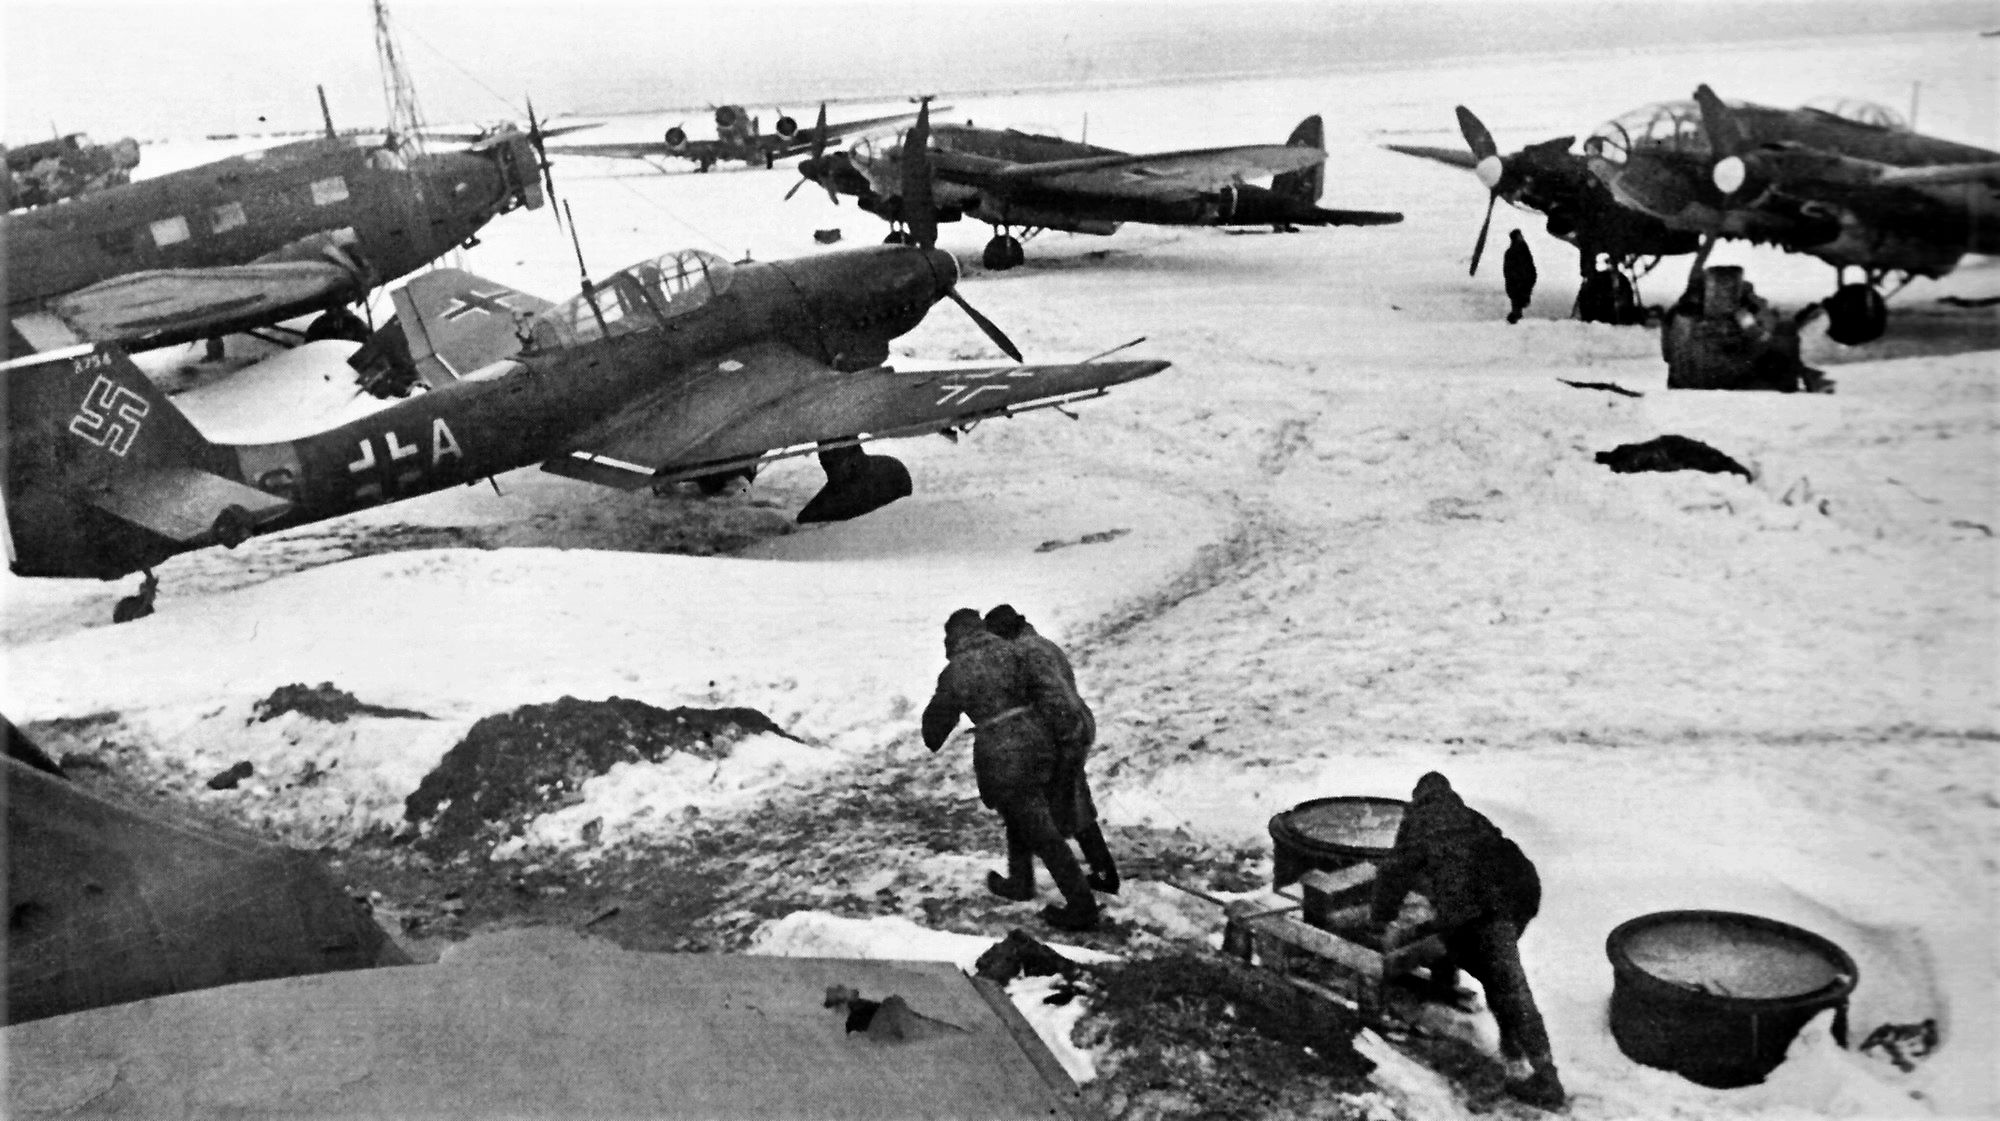 German aircraft, including a Ju-87 Stuka, He-111 bomber and Ju-52 transports, sit on an airfield that has been overrun by the Soviets near Stalingrad. Luftwaffe chief Reichsmarschall Hermann Goering promised to supply besieged Stalingrad by air but failed in the effort. 